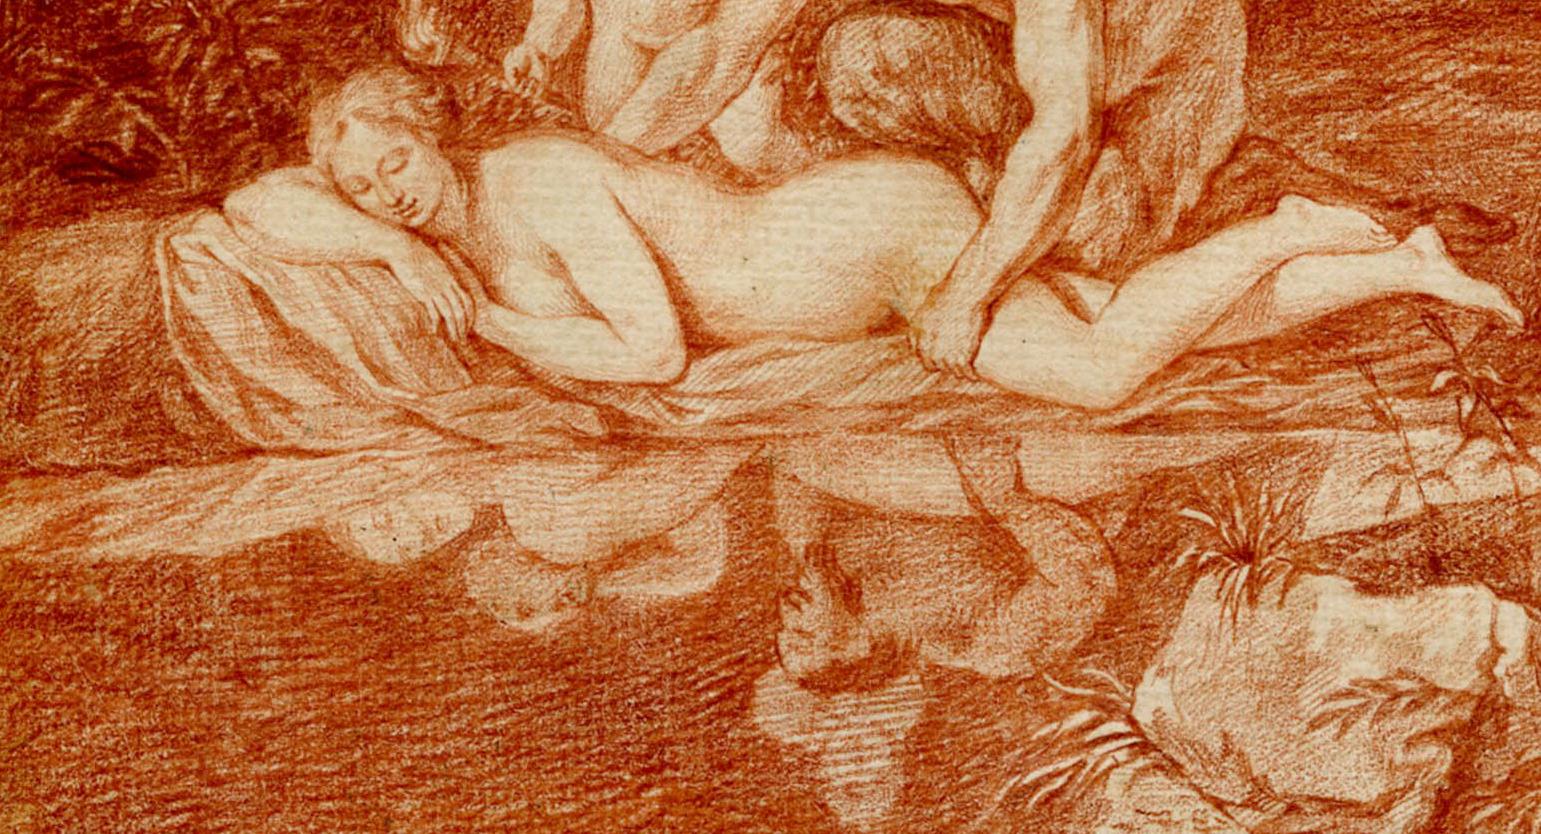 Bernard Picart (1673-1733)
Jupiter and Antiope
Red chalk drawing, surrounded by ruled album mount
Image: 8 3/4 x 6 7/8